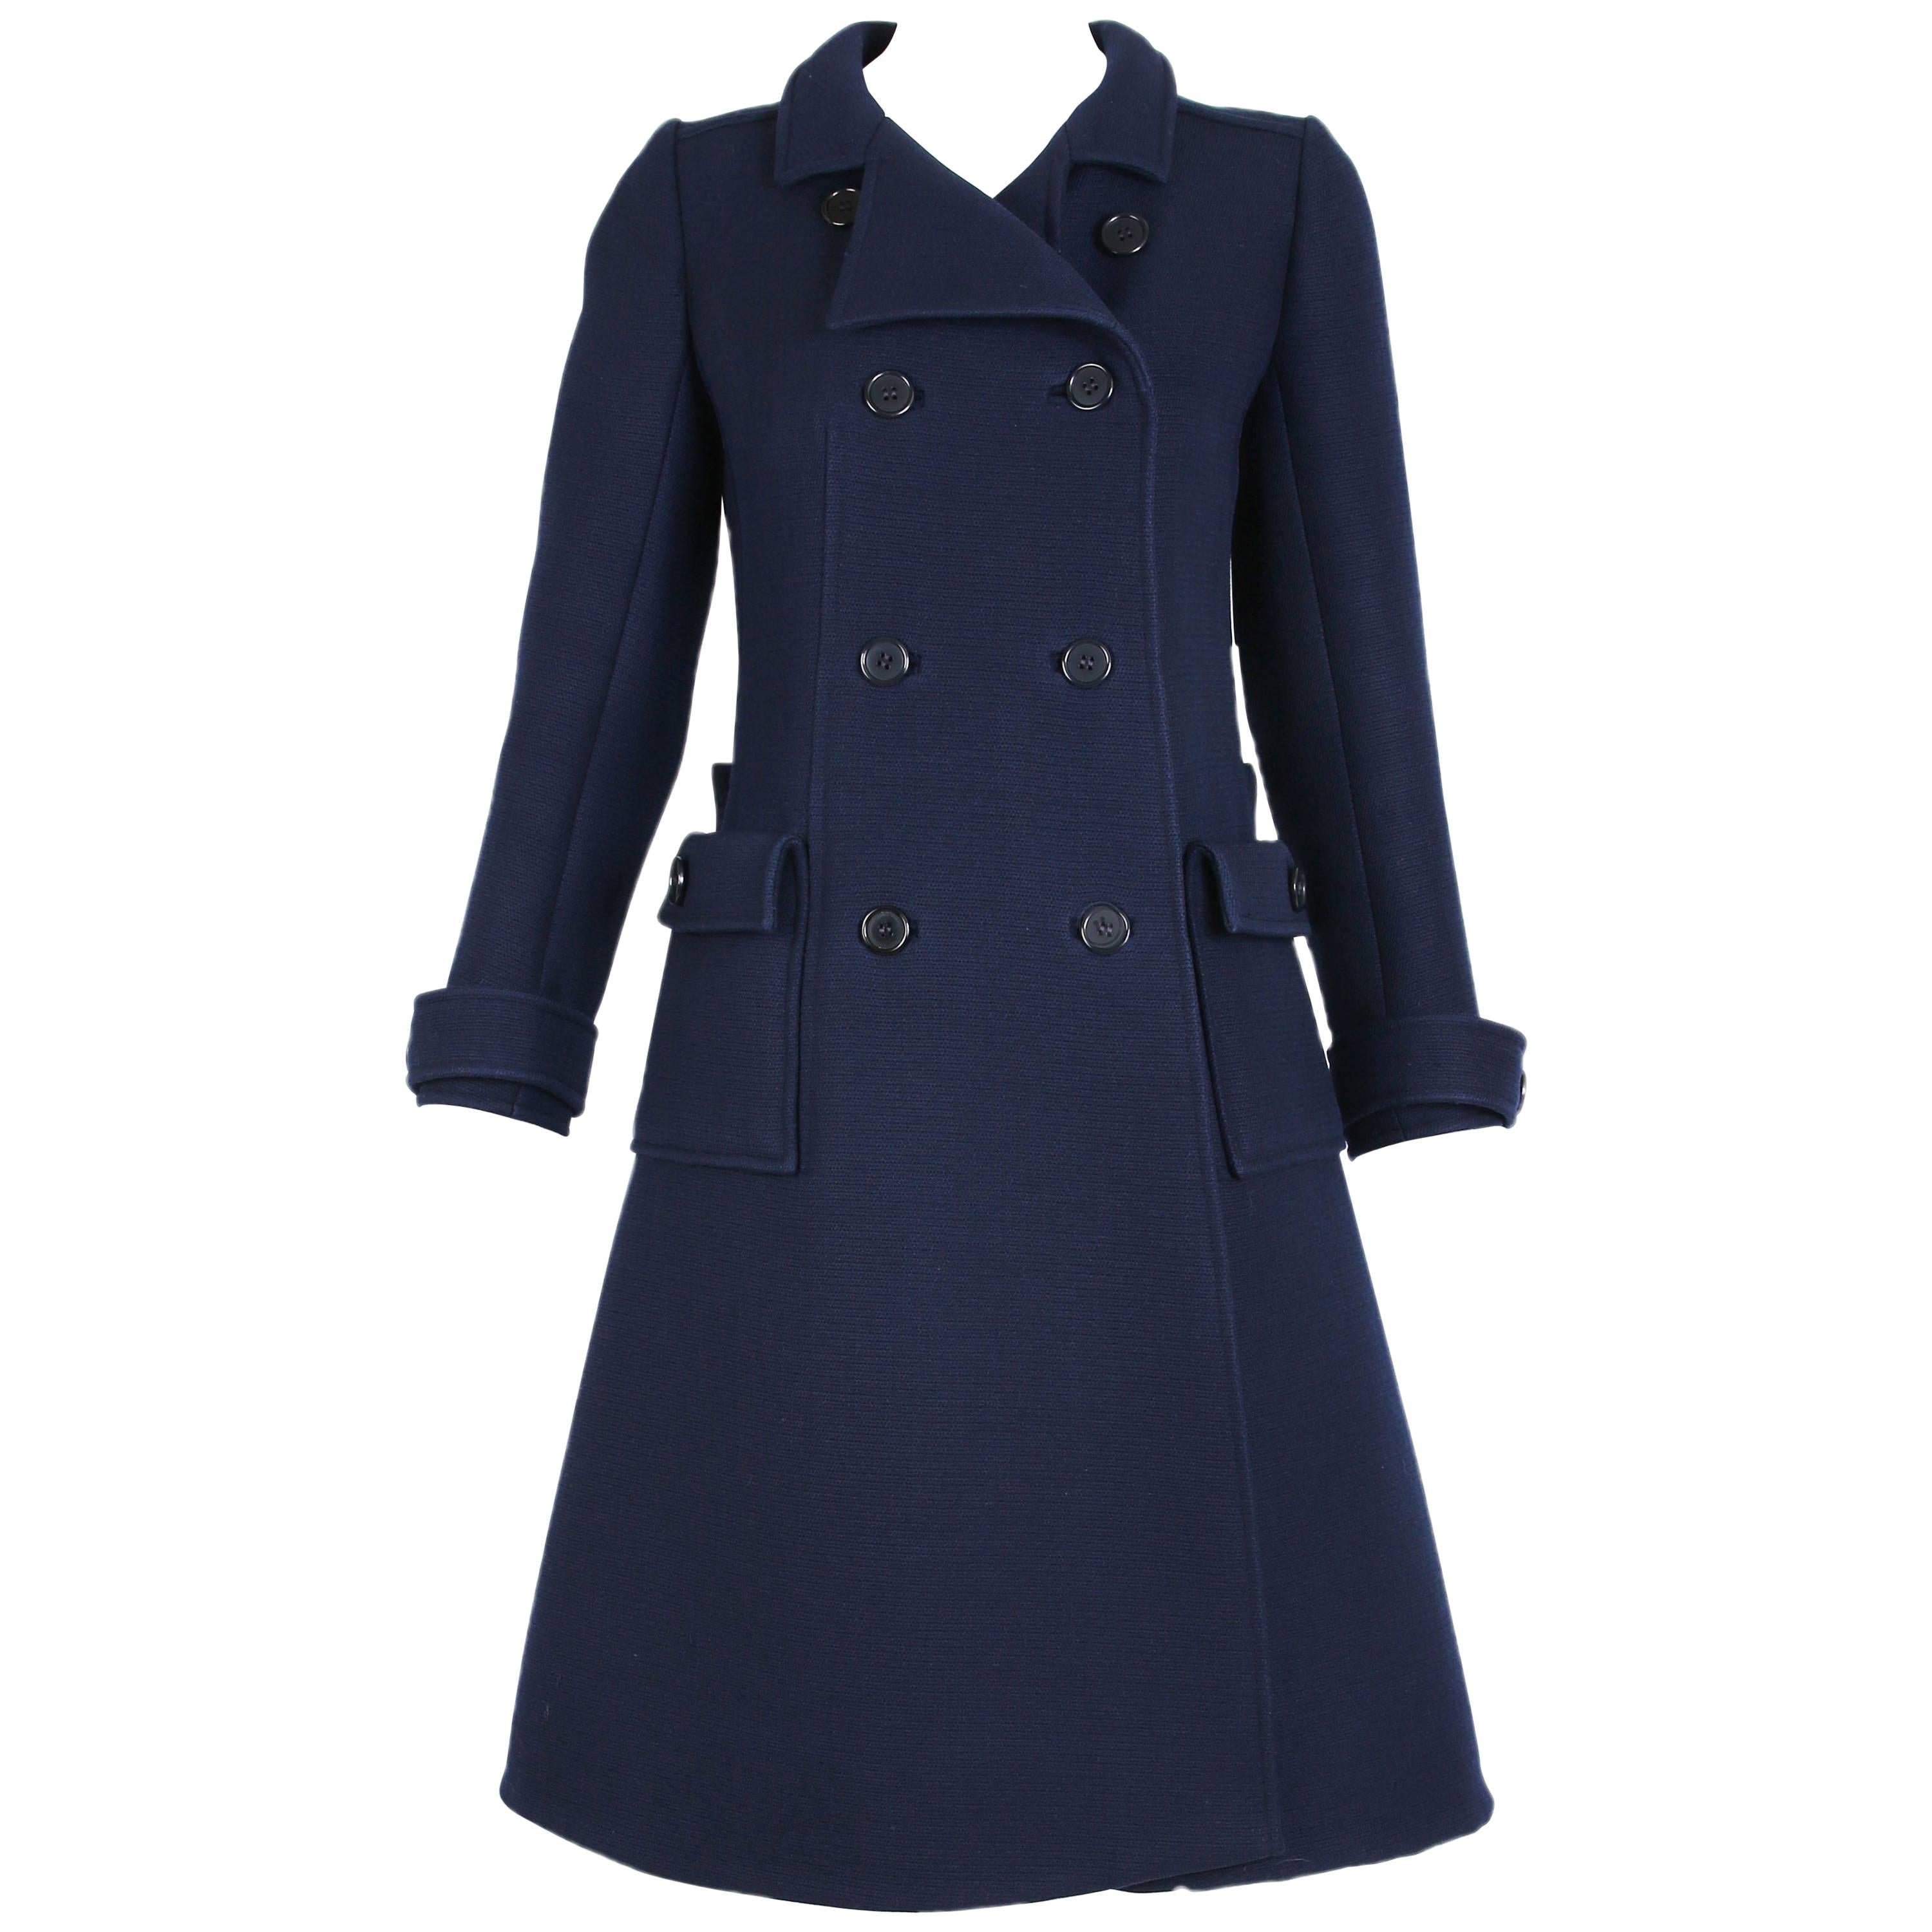 1960's Courreges for Bonwit Teller Navy Mod Space Age Wool Double-Breasted Coat